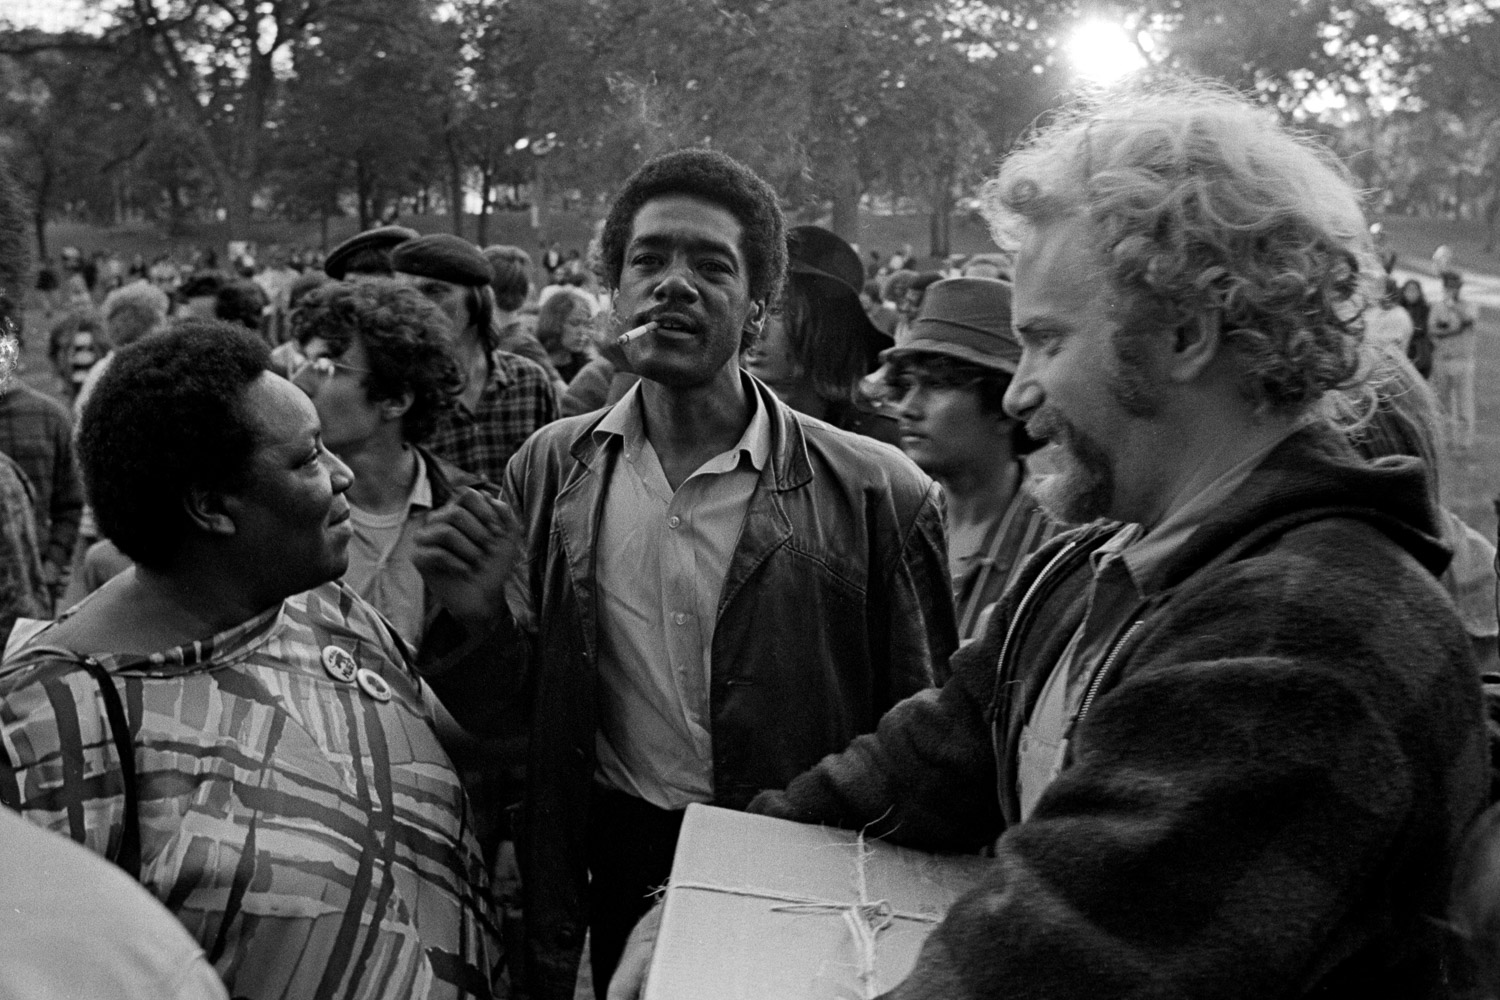  Stew Albert (right), Bobby Seale (center) and an unidentified leader of the southern civil rights movement (left) arrive at Lincoln Park to speak. 